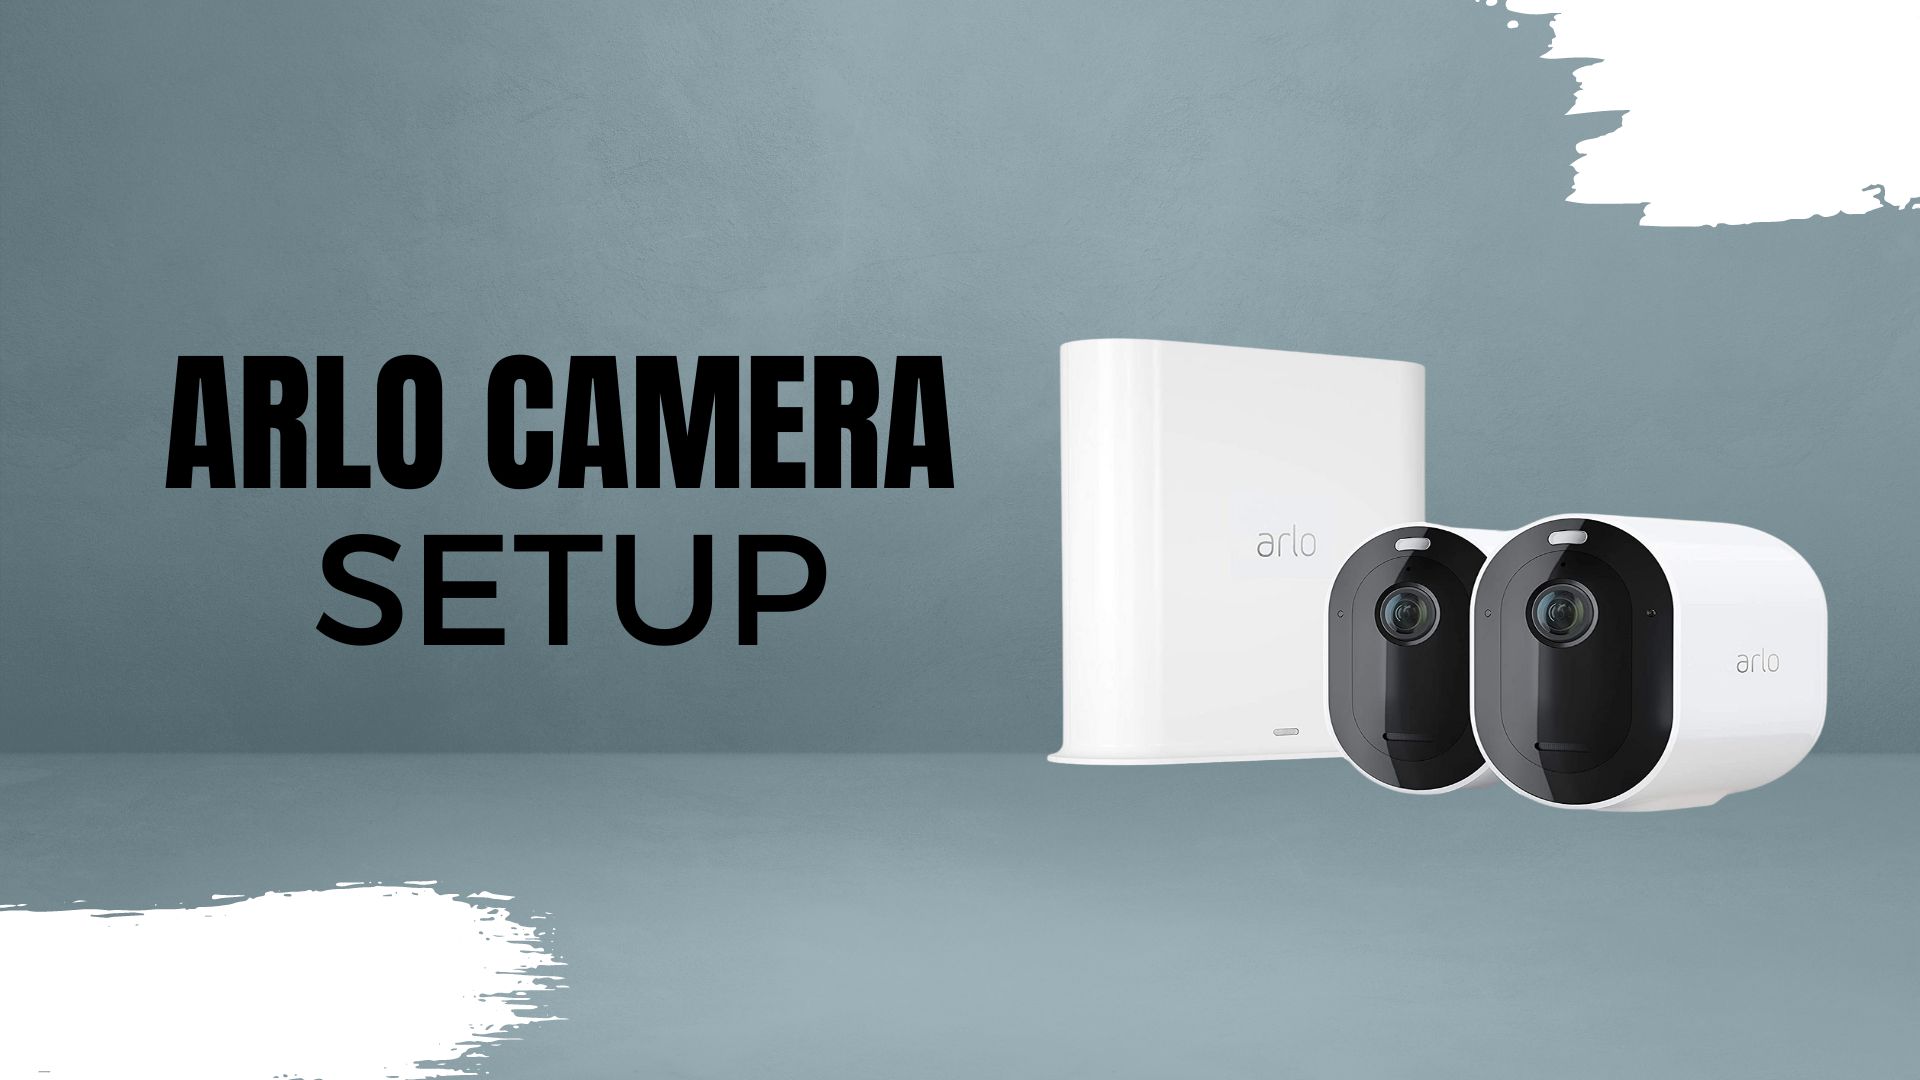 How To Set Up Arlo Camera With Home Wi-Fi?